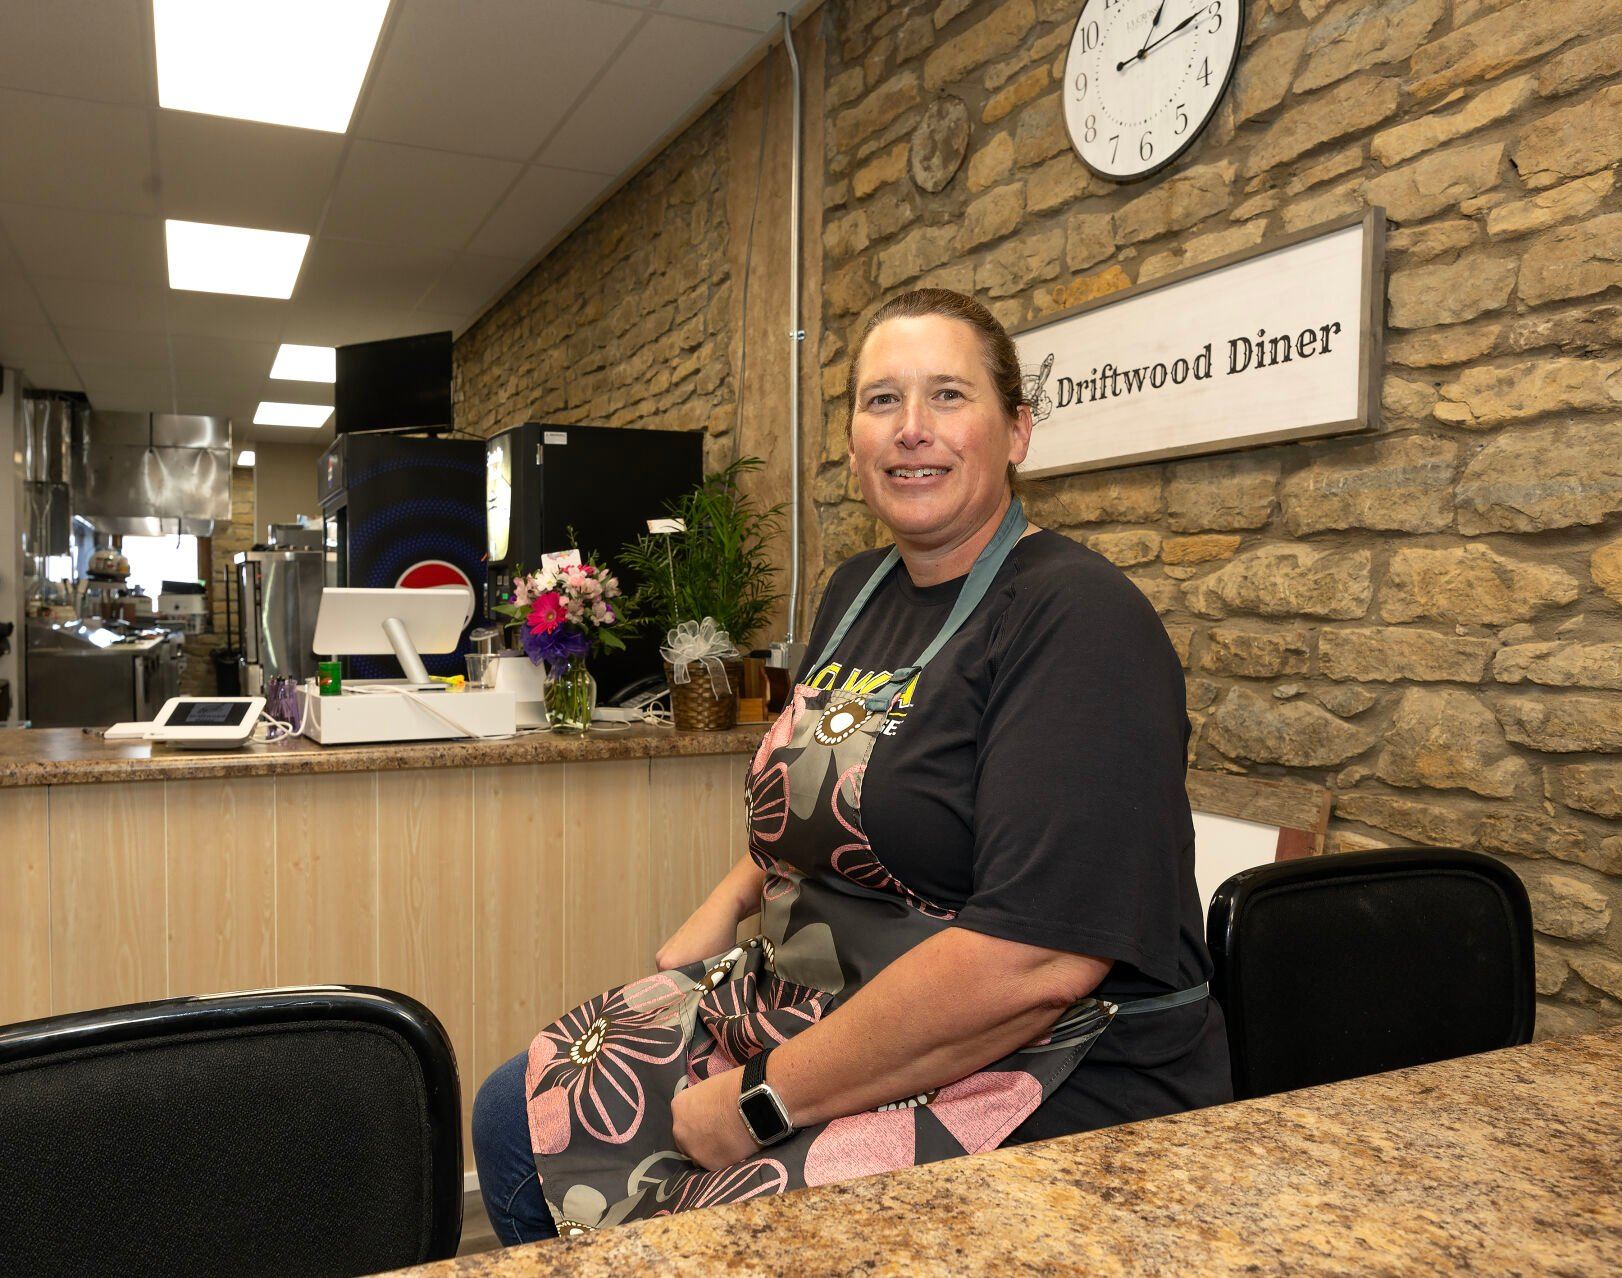 Owner Ann Moore sits at a counter inside Driftwood Diner in Guttenberg, Iowa, on Thursday.    PHOTO CREDIT: Stephen Gassman